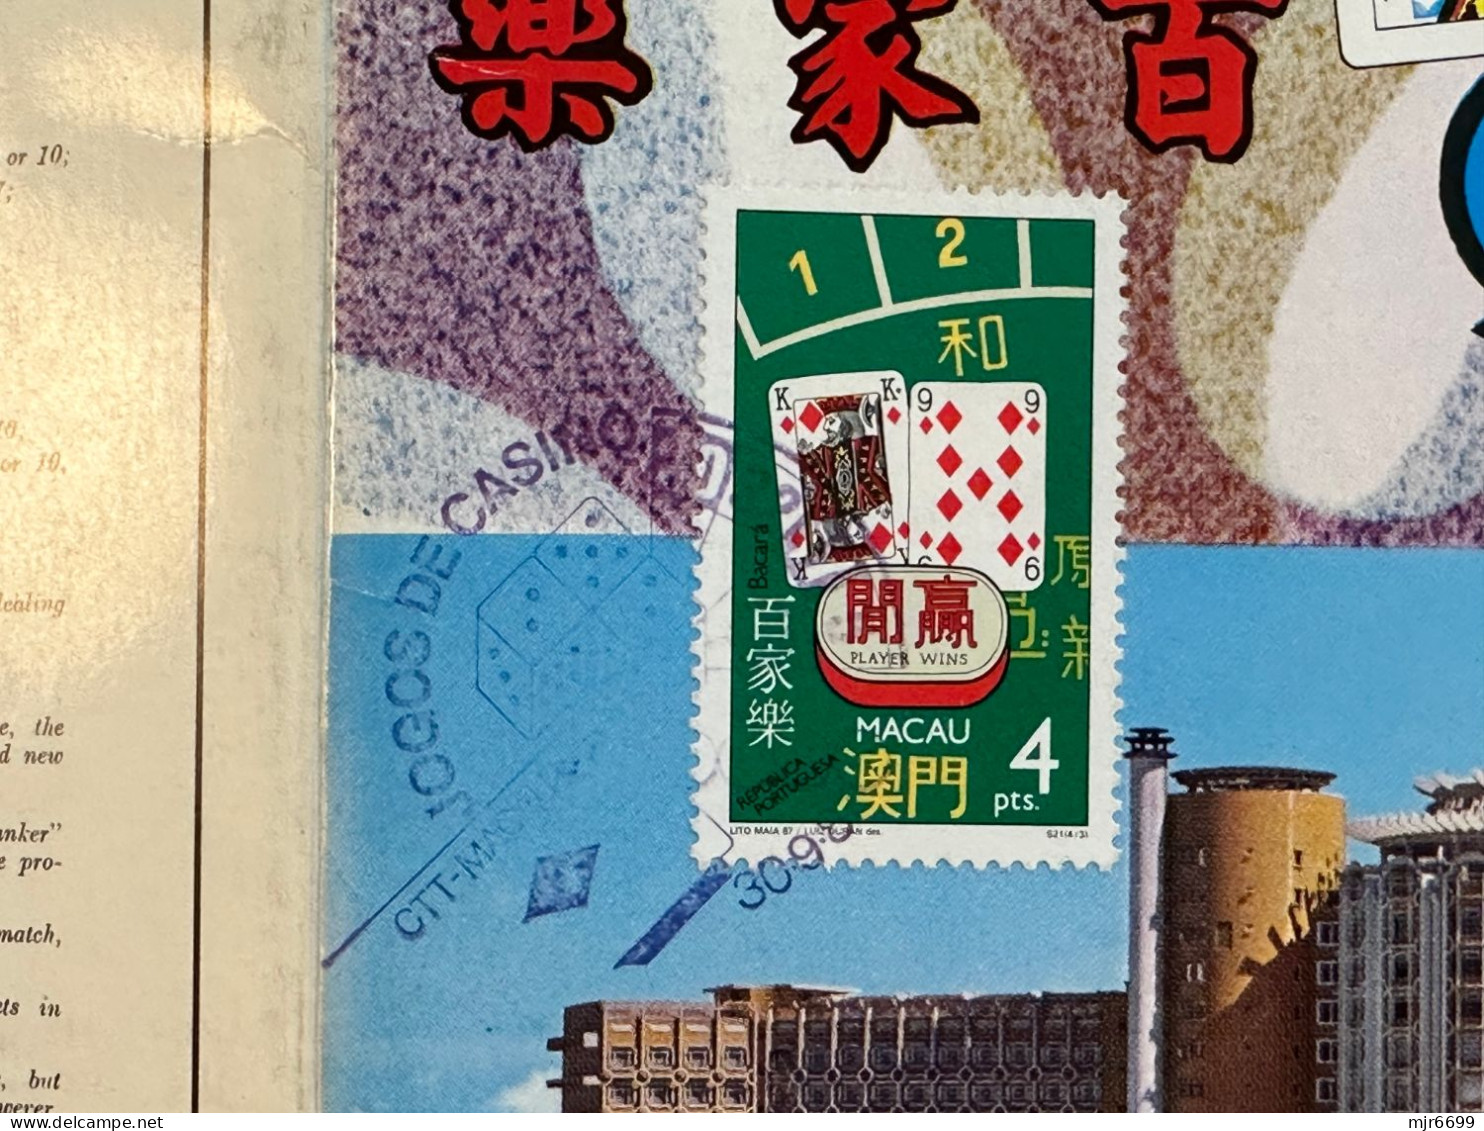 MACAU 1987 CASINO GAMES STAMPS  USED IN BACCARAT OFFICIAL RULES CHART & FANTAN REGISTER PAPER CARD - Gebraucht